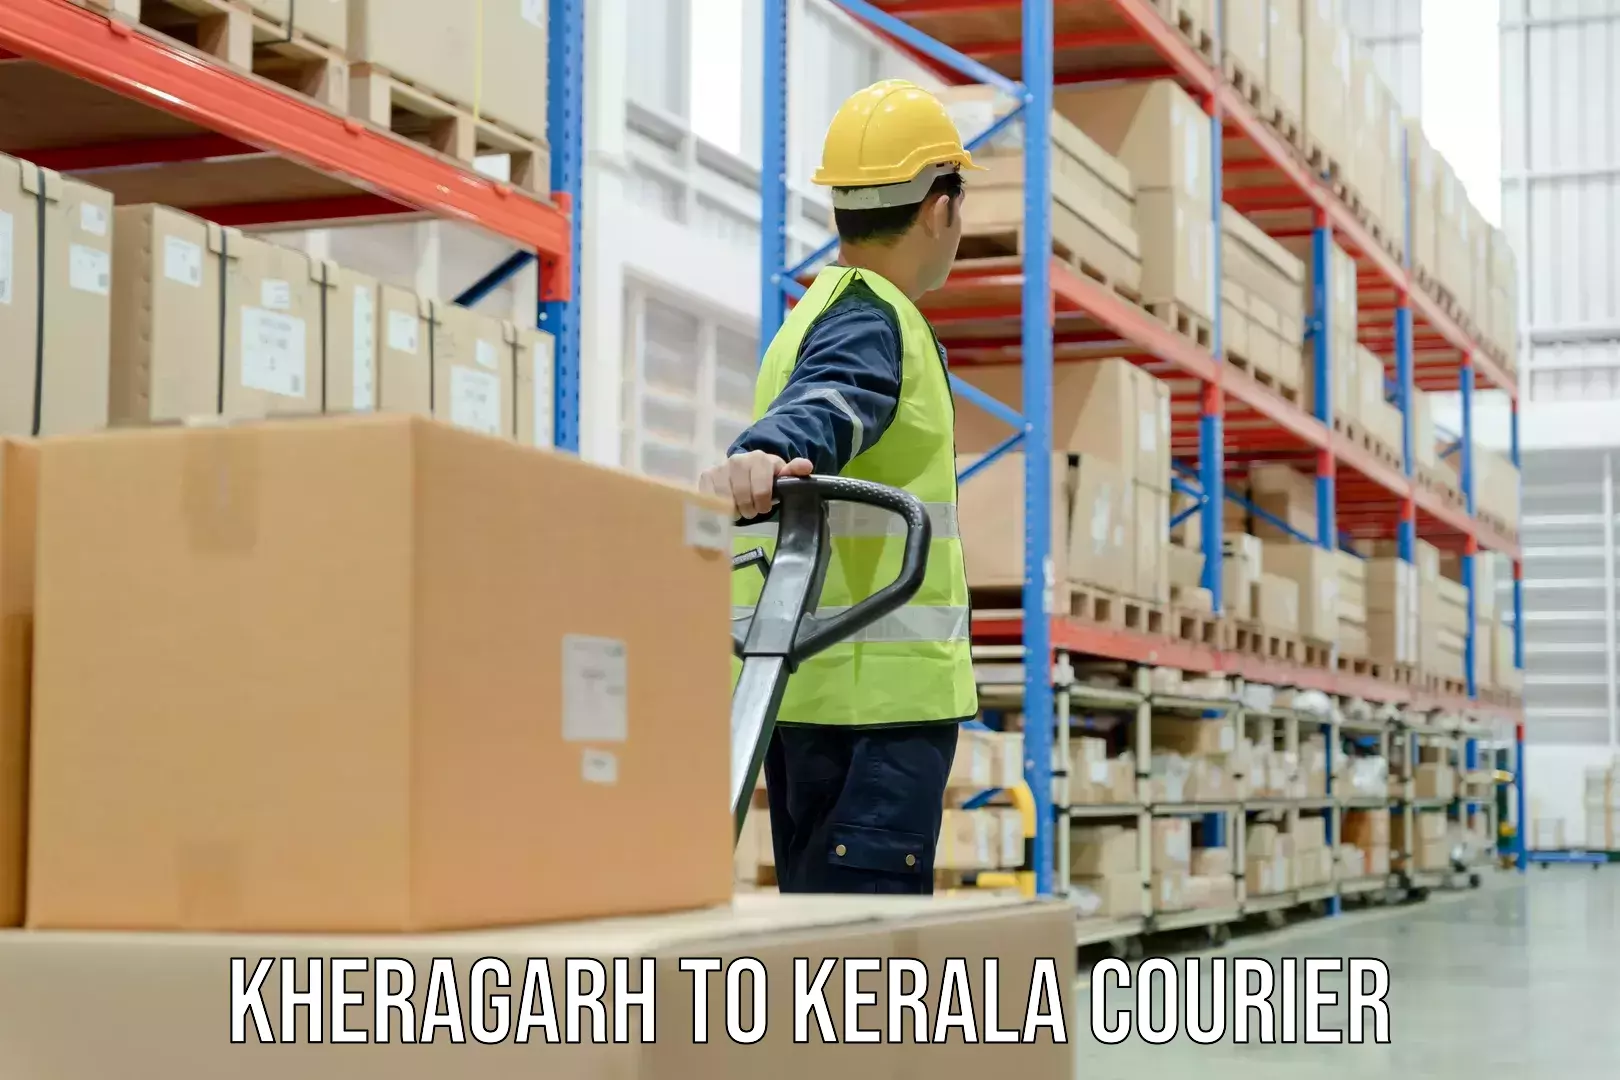 On-call courier service Kheragarh to Ponnani